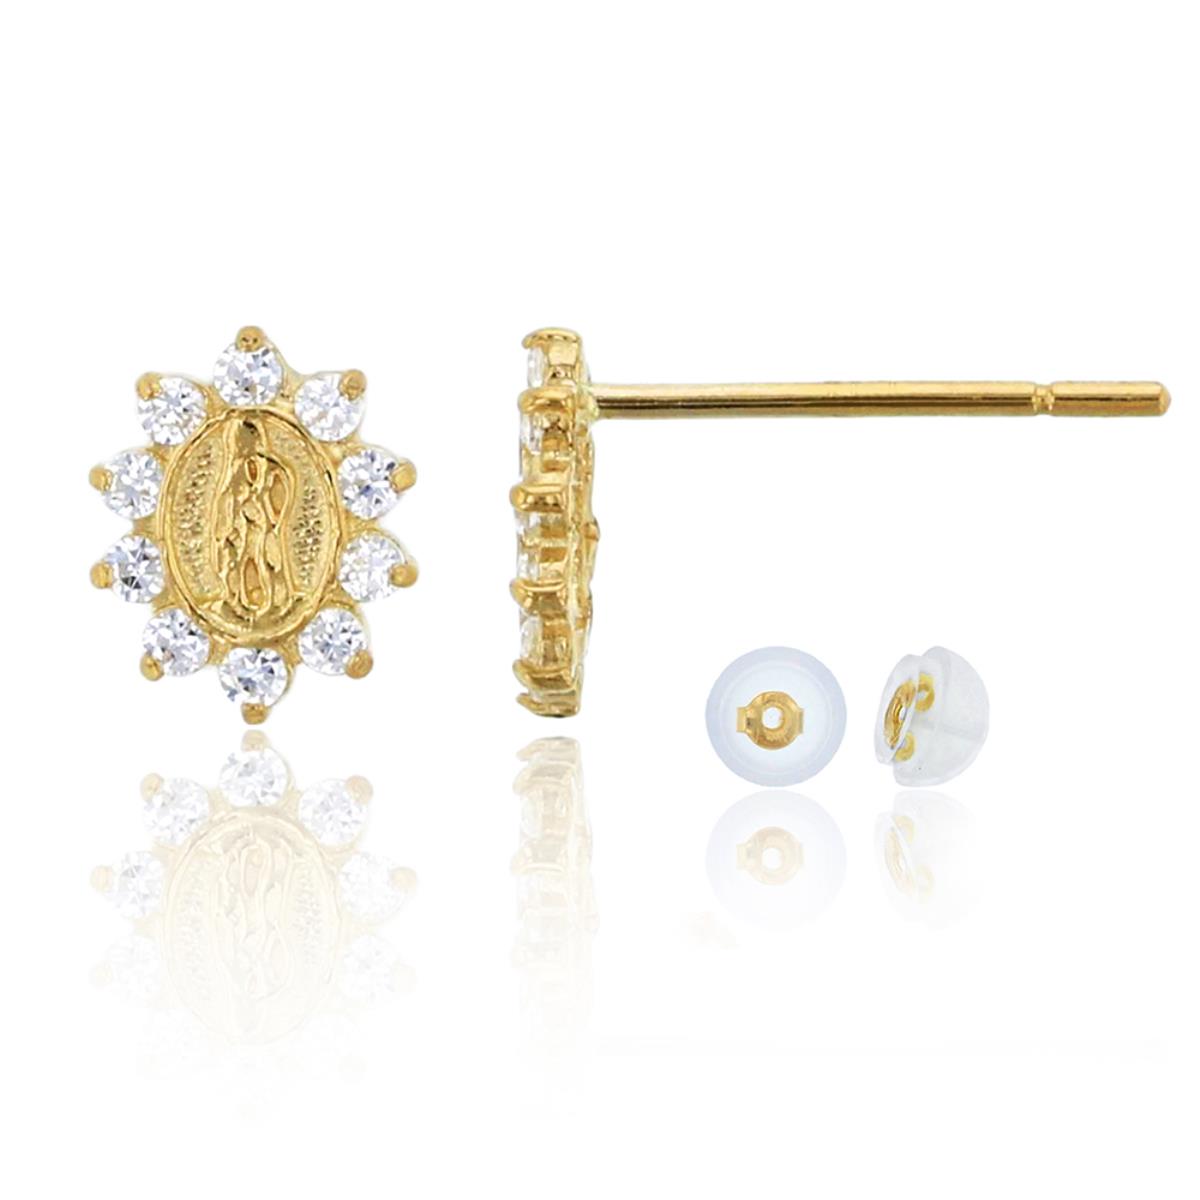 10K Yellow Gold Micropave Religious CZ Stud Earring & 10K Silicone Back